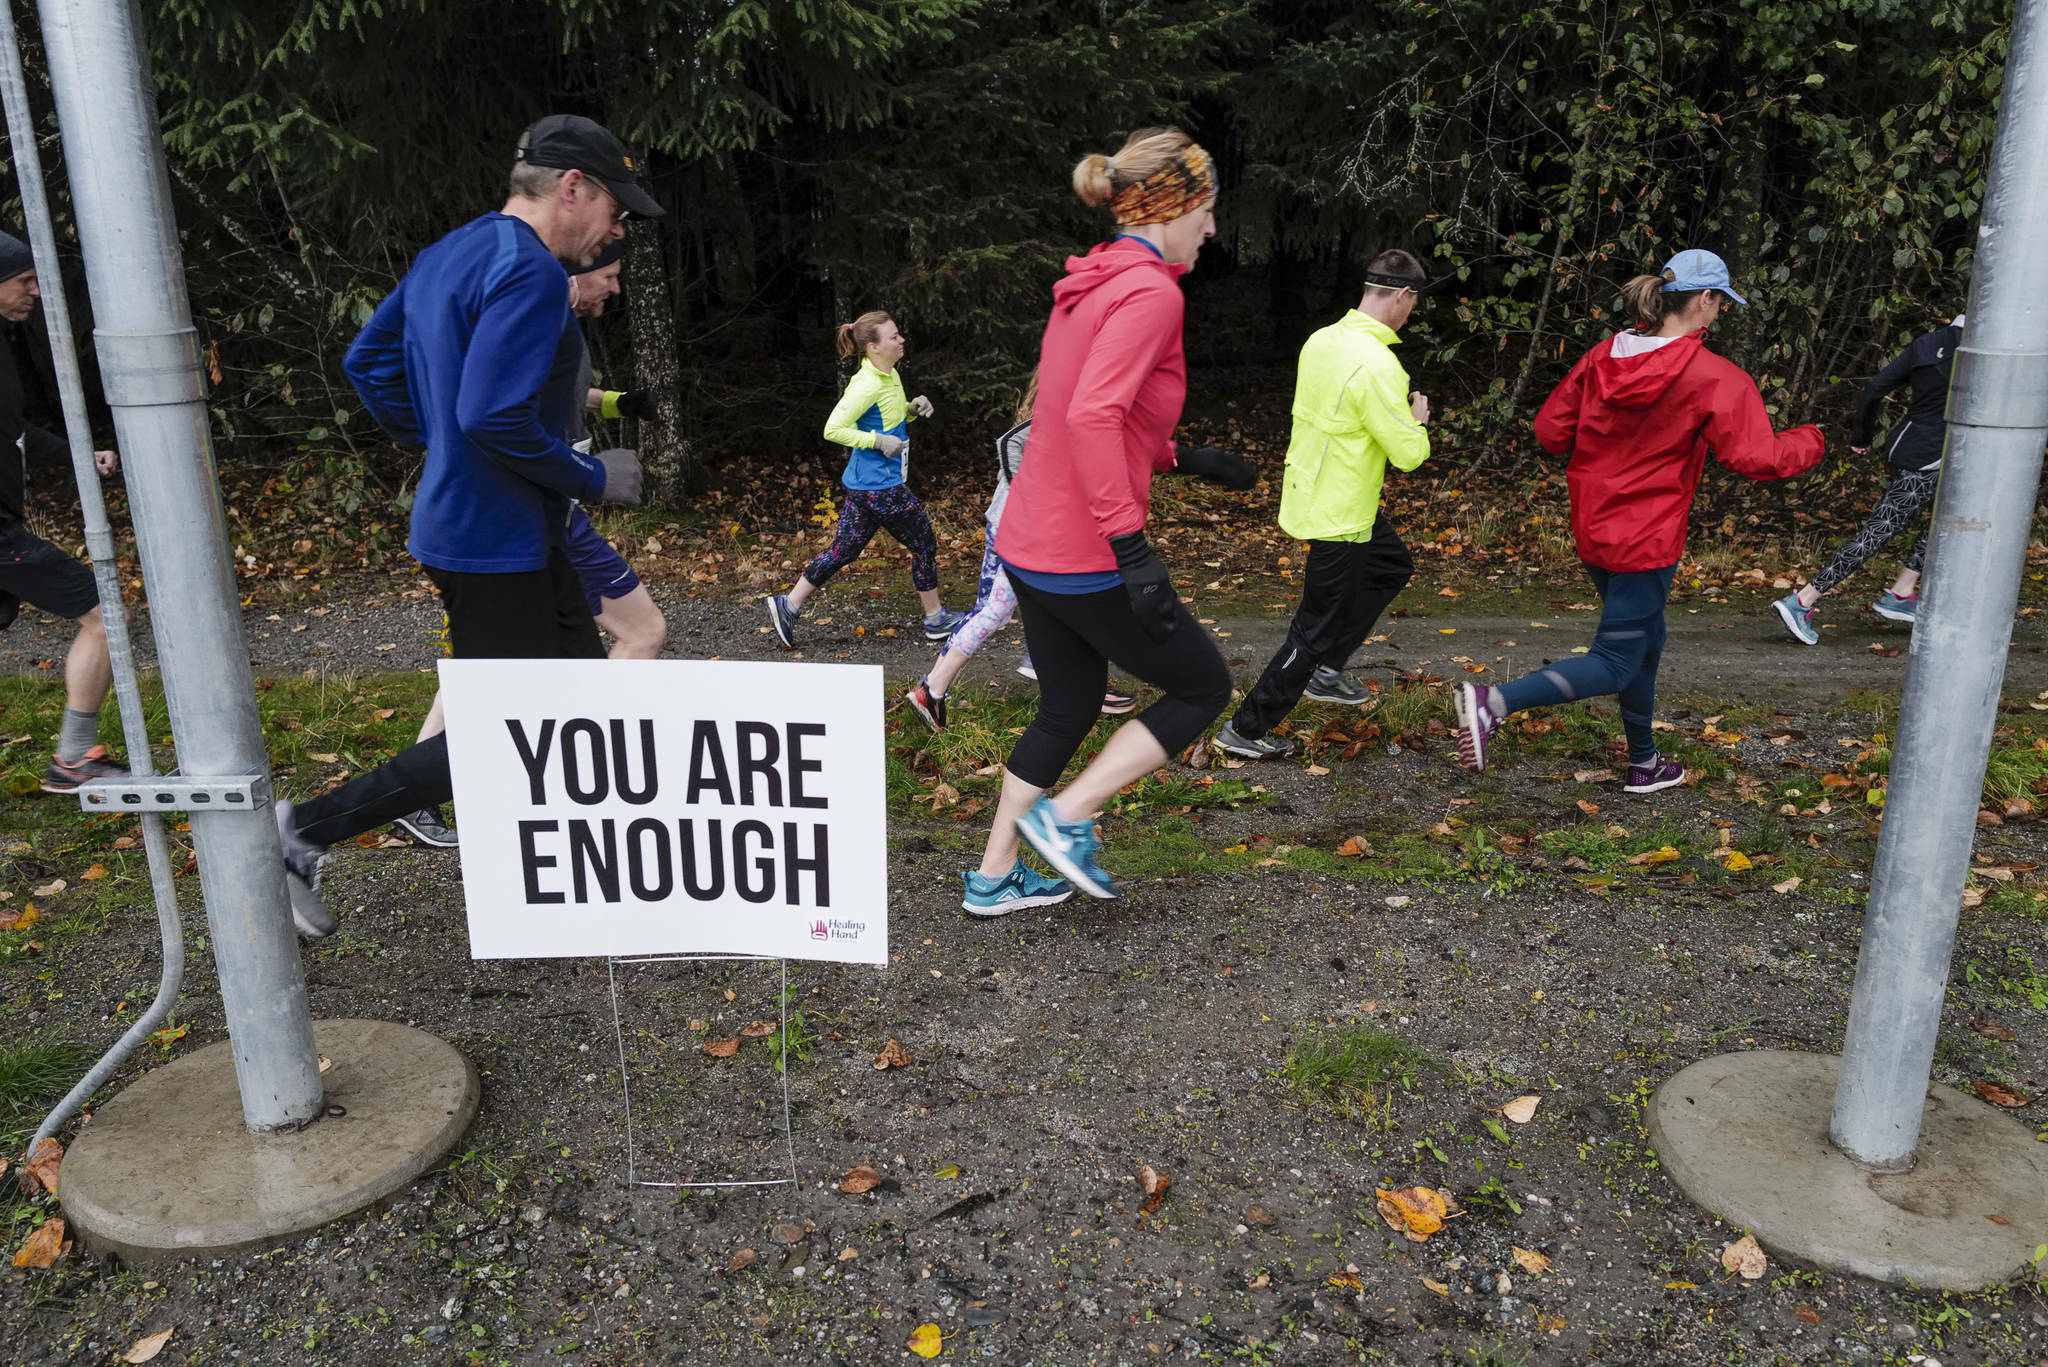 Juneau residents participate in a community mental health run, the Extra Tough 5K & 1 Mile Run, on Saturday, Oct. 12, 2019. The run was sponsored by National Alliance on Mental Illness (NAMI) Juneau. (Michael Penn / Juneau Empire file photo)